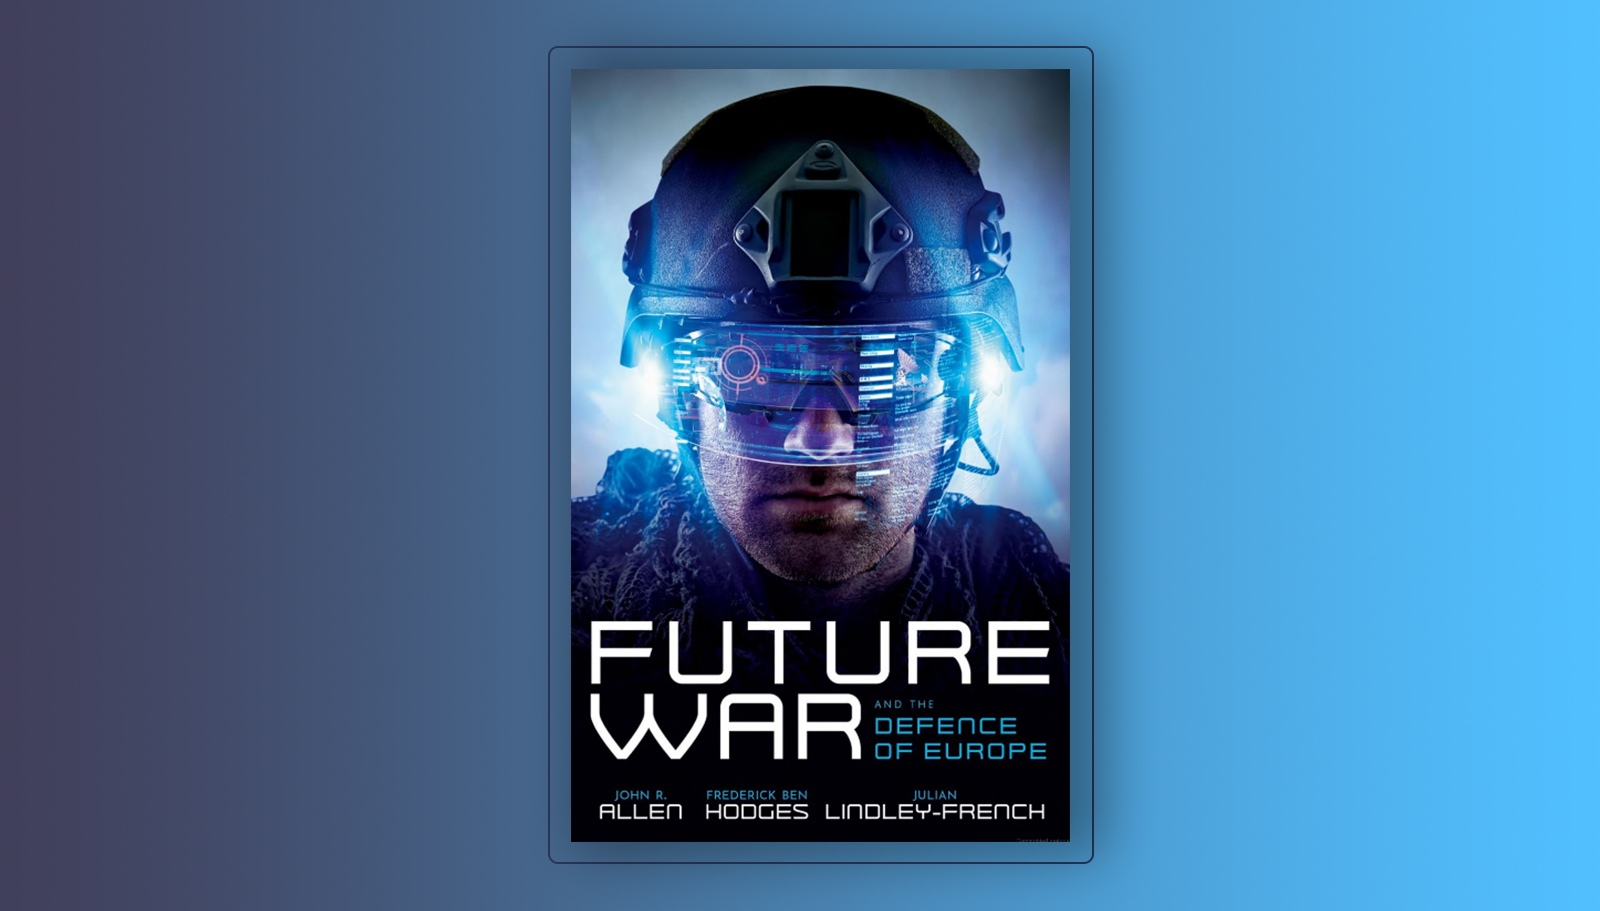 Future War and the Defence of Europe by John R. Allen, Ben Hodges, and Julian Lindley-French